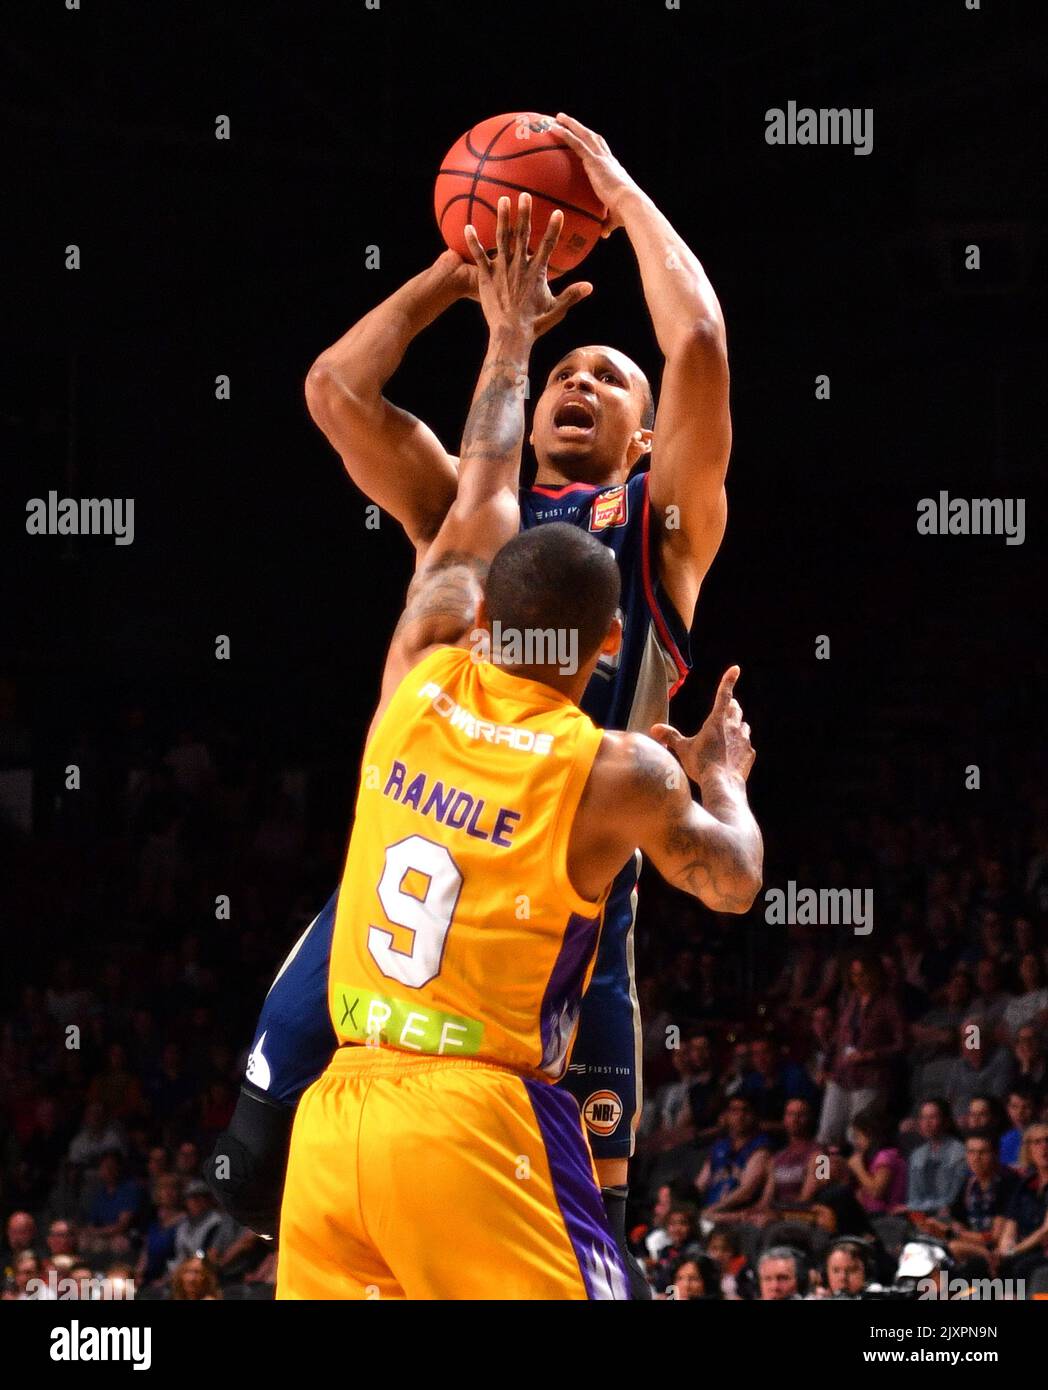 RETRANSMISSION***CORRECTING PLAYERS NAMES TO JEROME RANDLE*** Adris Deleon  of the Adelaide 36ers and Jerome Randle of the Sydney Kings during the  Round 5 NBL match between the Adelaide 36ers and the Sydney